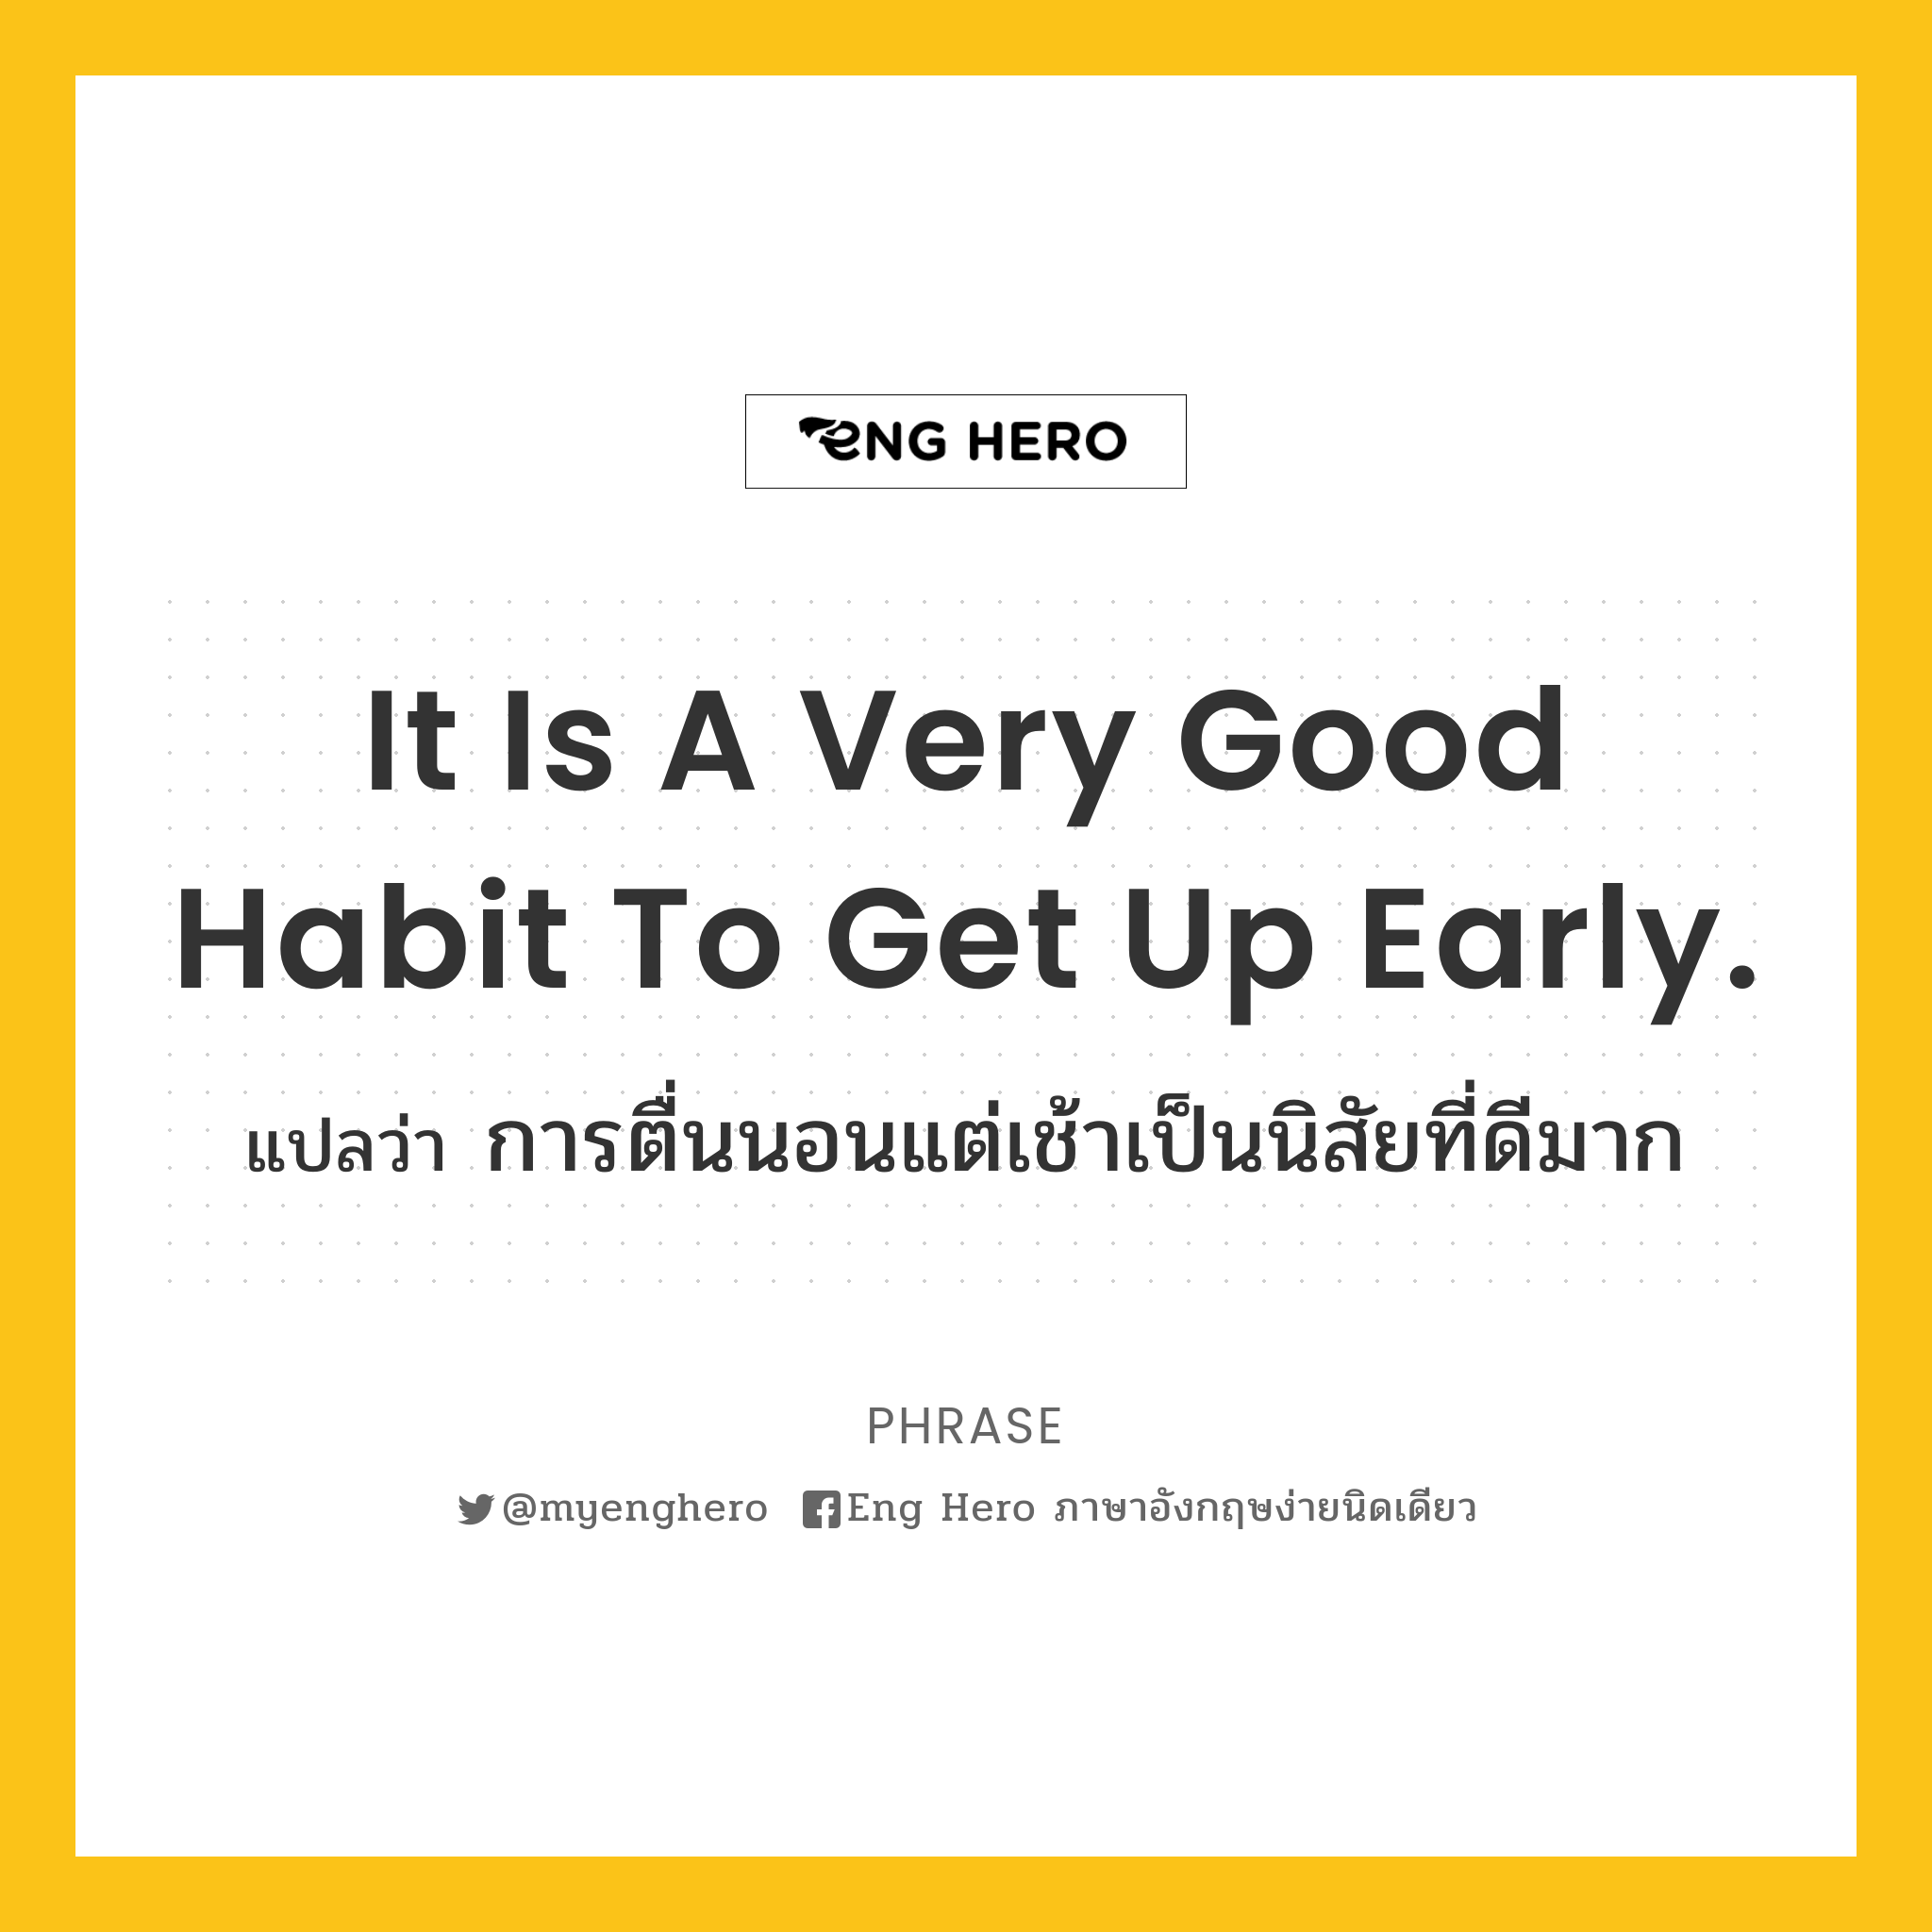 It is a very good habit to get up early.